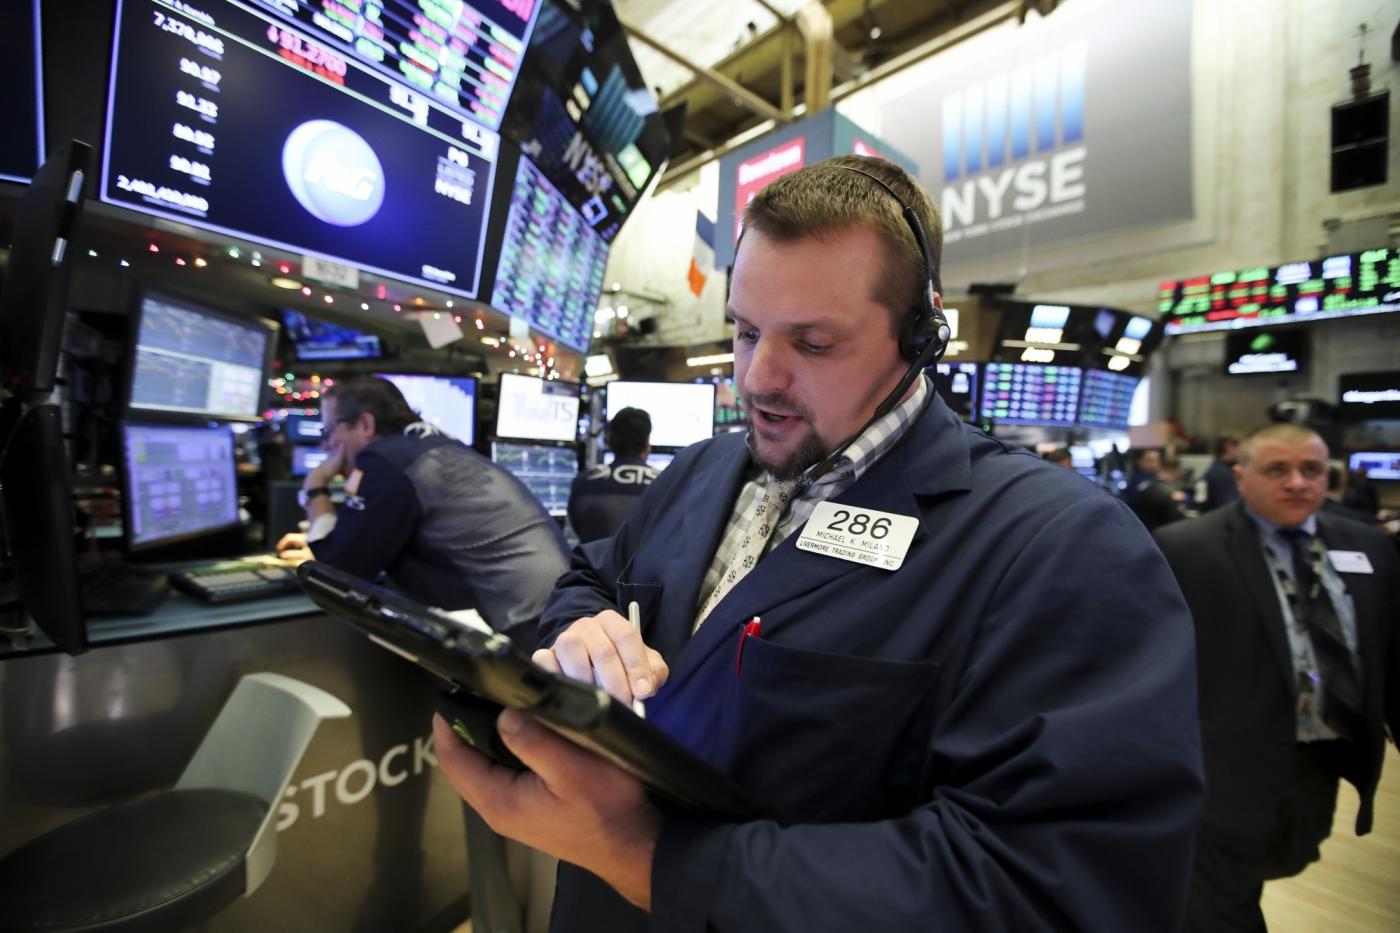 NEW YORK, Jan. 2, 2019 (Xinhua) -- Traders work at the New York Stock Exchange in New York, the United States, on Jan. 2, 2019. U.S. stocks ended slightly higher on Wednesday, starting a new year with a fluctuant trading day. The Dow Jones Industrial Average closed 18.78 points, or 0.08 percent, higher to 23,346.24. The S&P 500 edged 3.18 points, or 0.13 percent, higher to 2,510.03. The Nasdaq Composite Index rallied 30.66 points, or 0.46 percent, to 6,665.94. (Xinhua/Wang Ying/IANS) by .